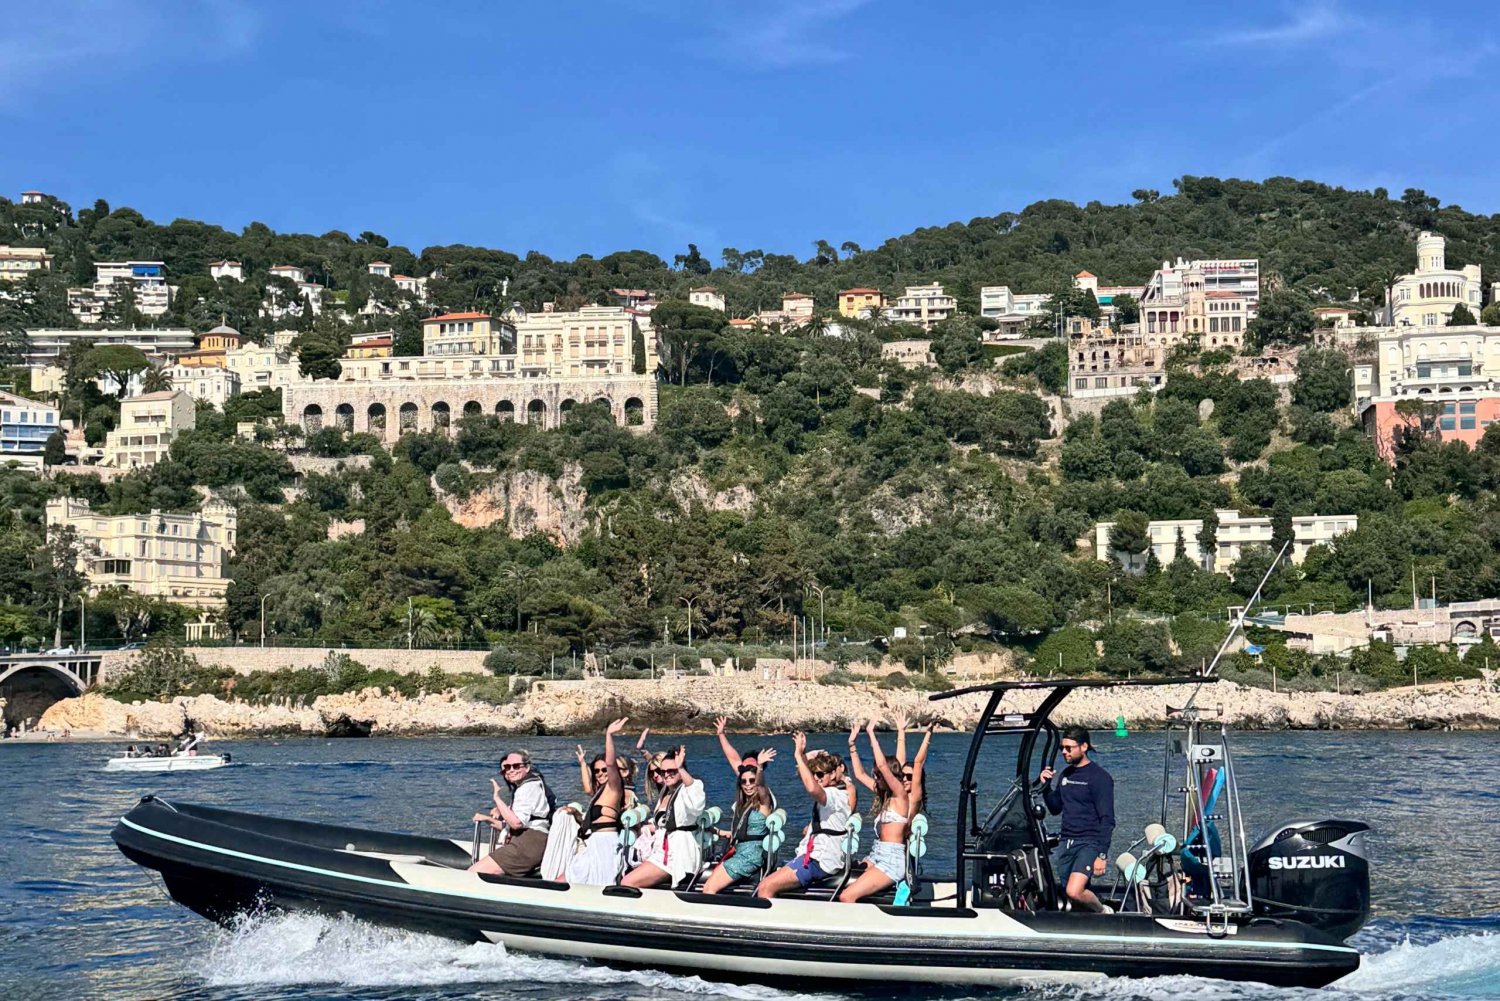 Boat trip from Nice : Swim & Relax at Villefranche-sur-Mer